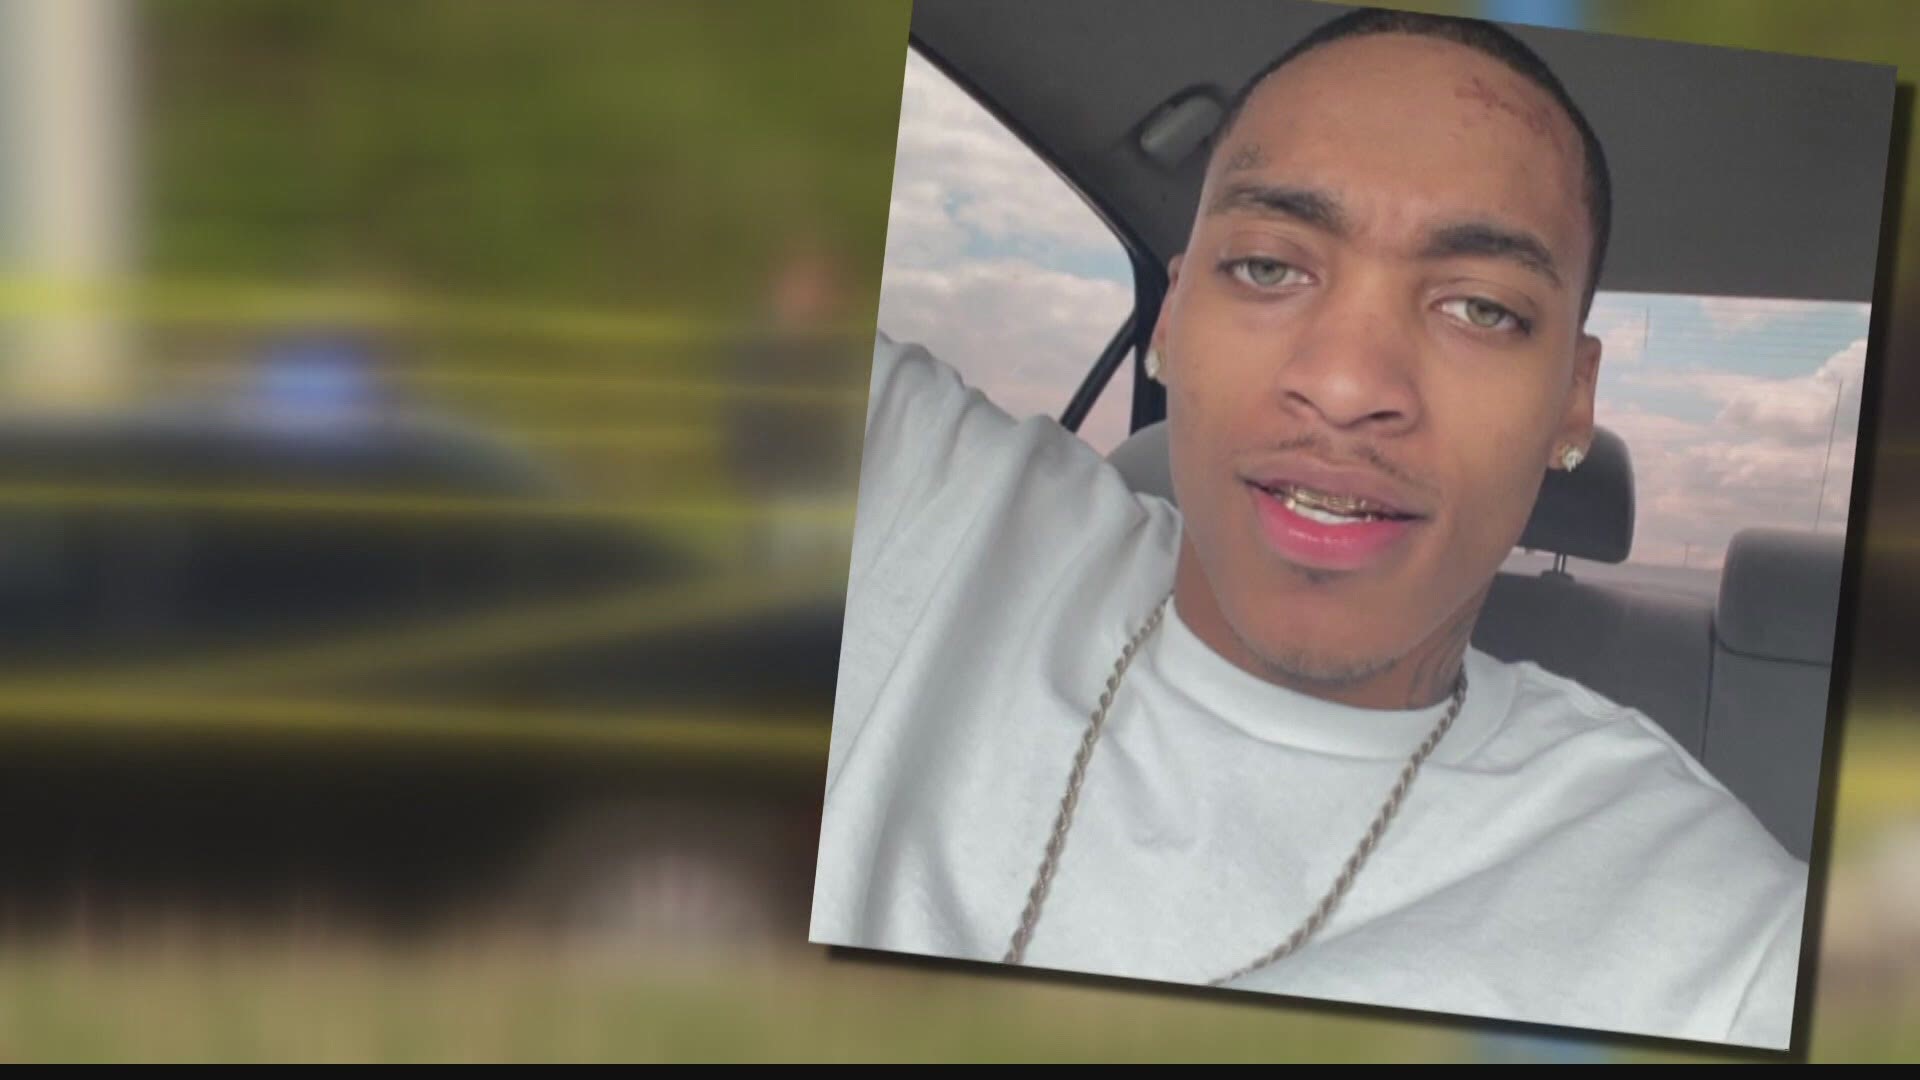 The family of Dreasjon Reed is now suing IMPD and the city of Indianapolis in wake of his death last month.